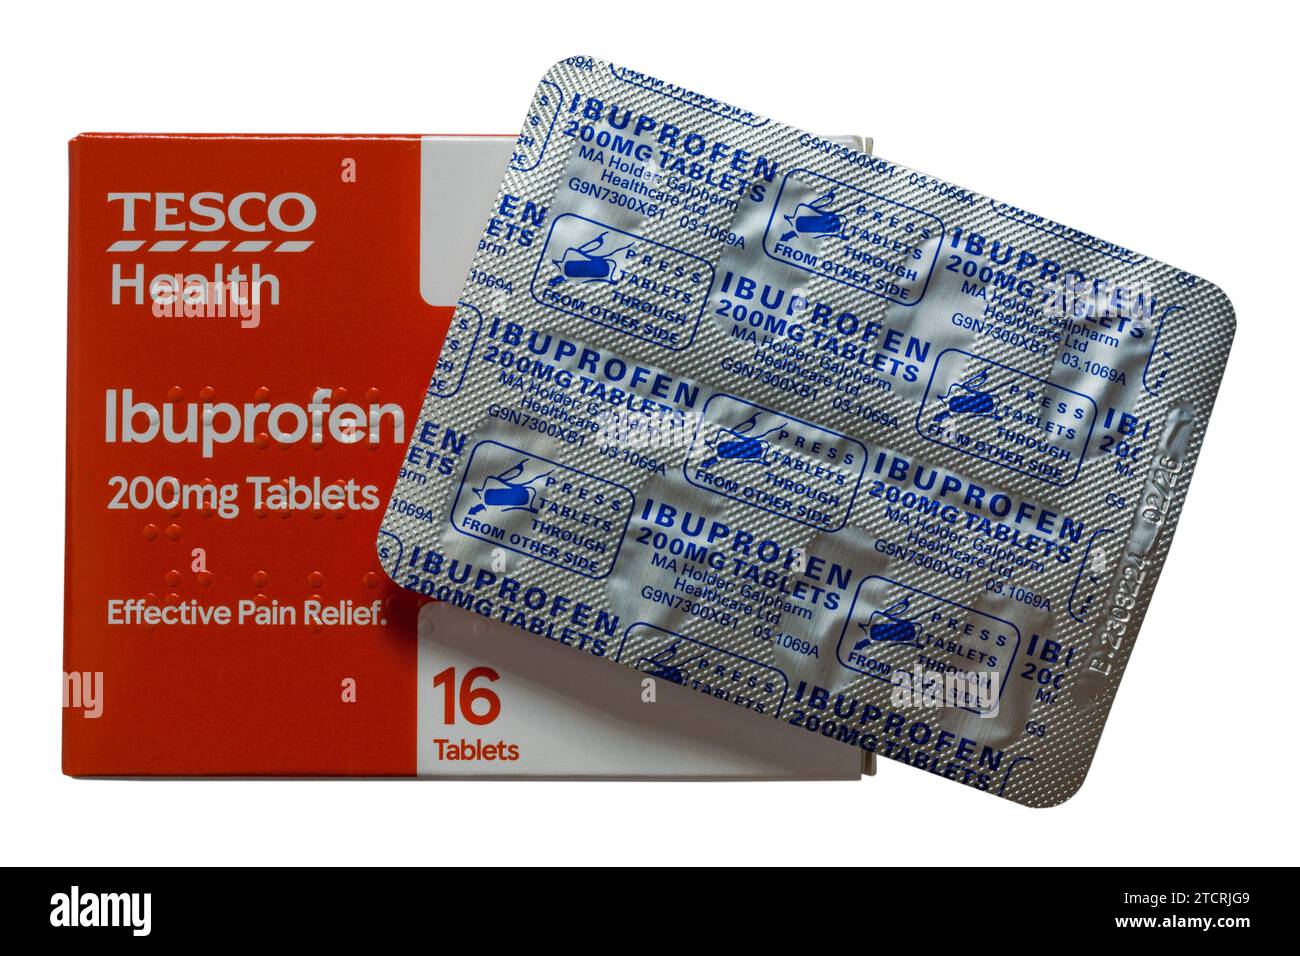 Tesco Health ibuprofen 200mg tablets effective pain relief tablets medication with blister pack removed  isolated on white background Stock Photo